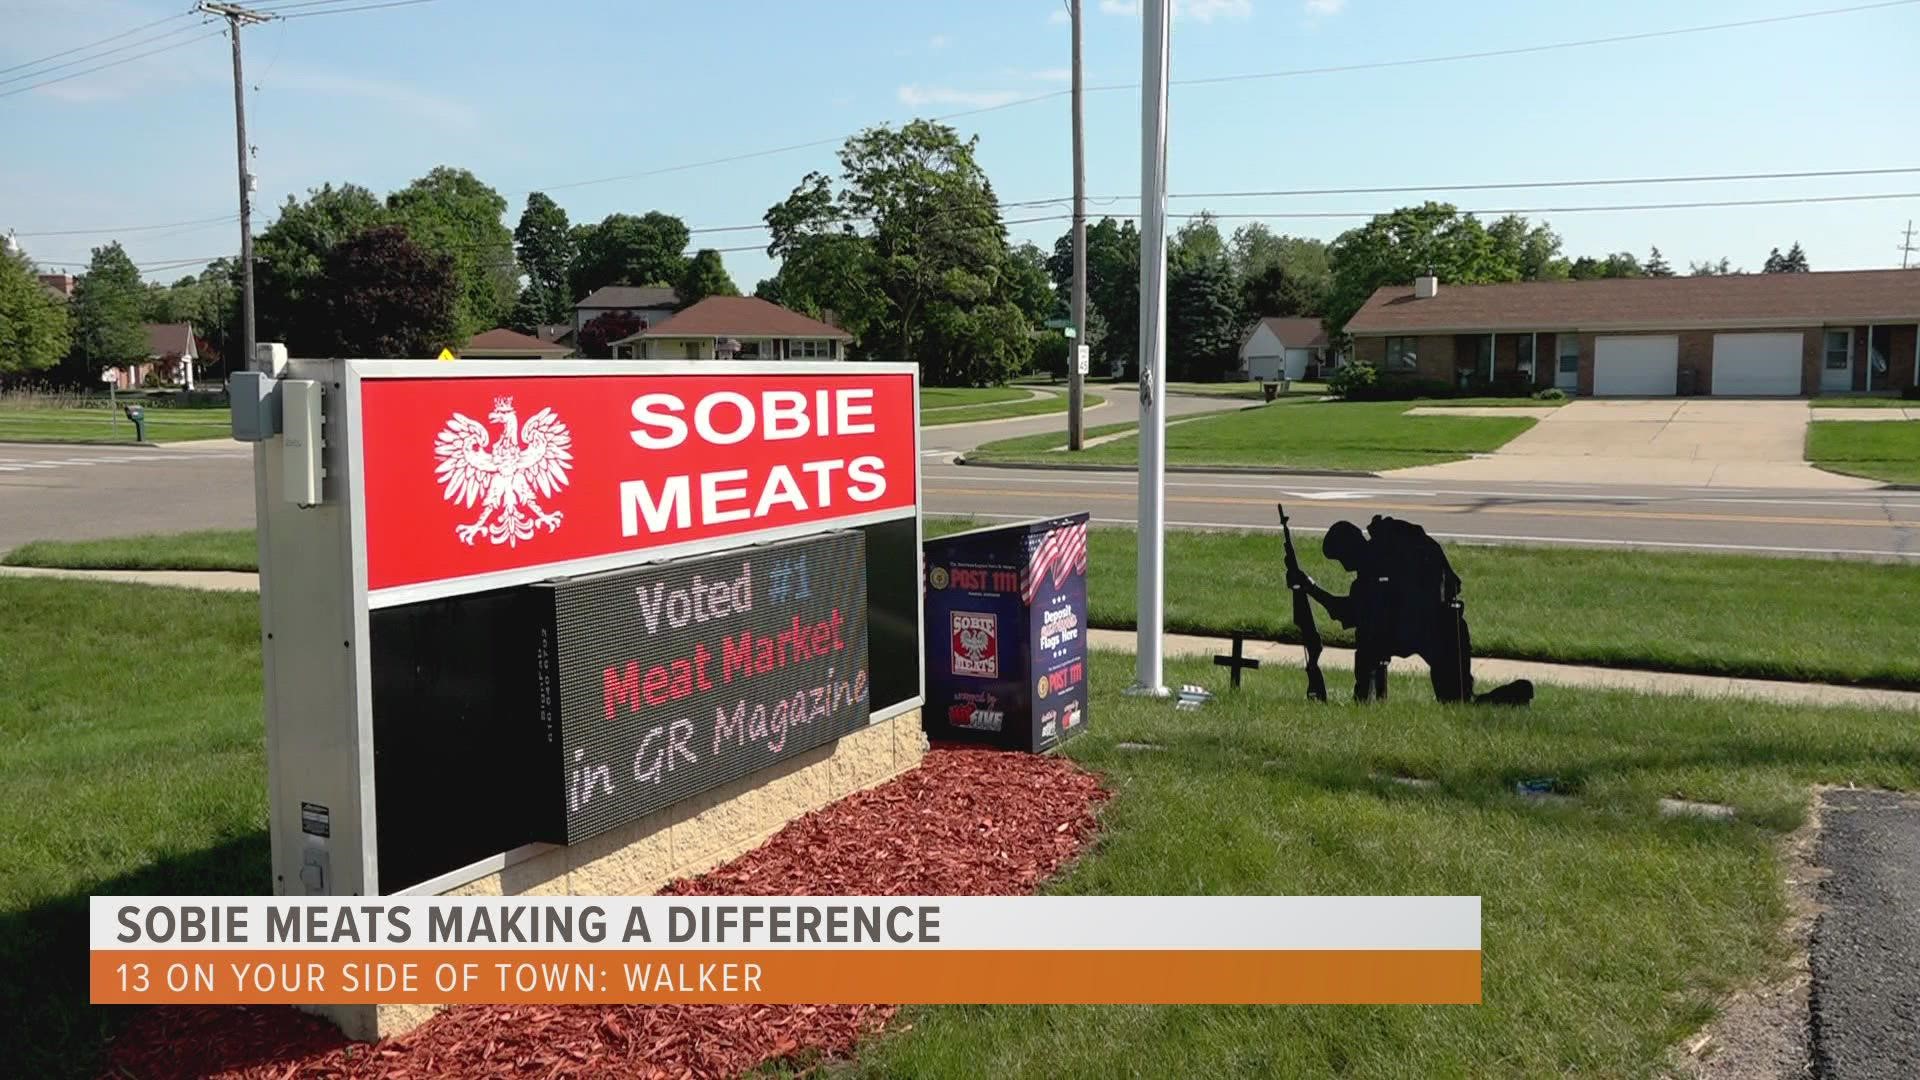 Sobie Meats gave back to Walker by celebrating their 18th anniversary with a fundraiser for the Walker Police and Fire Departments.